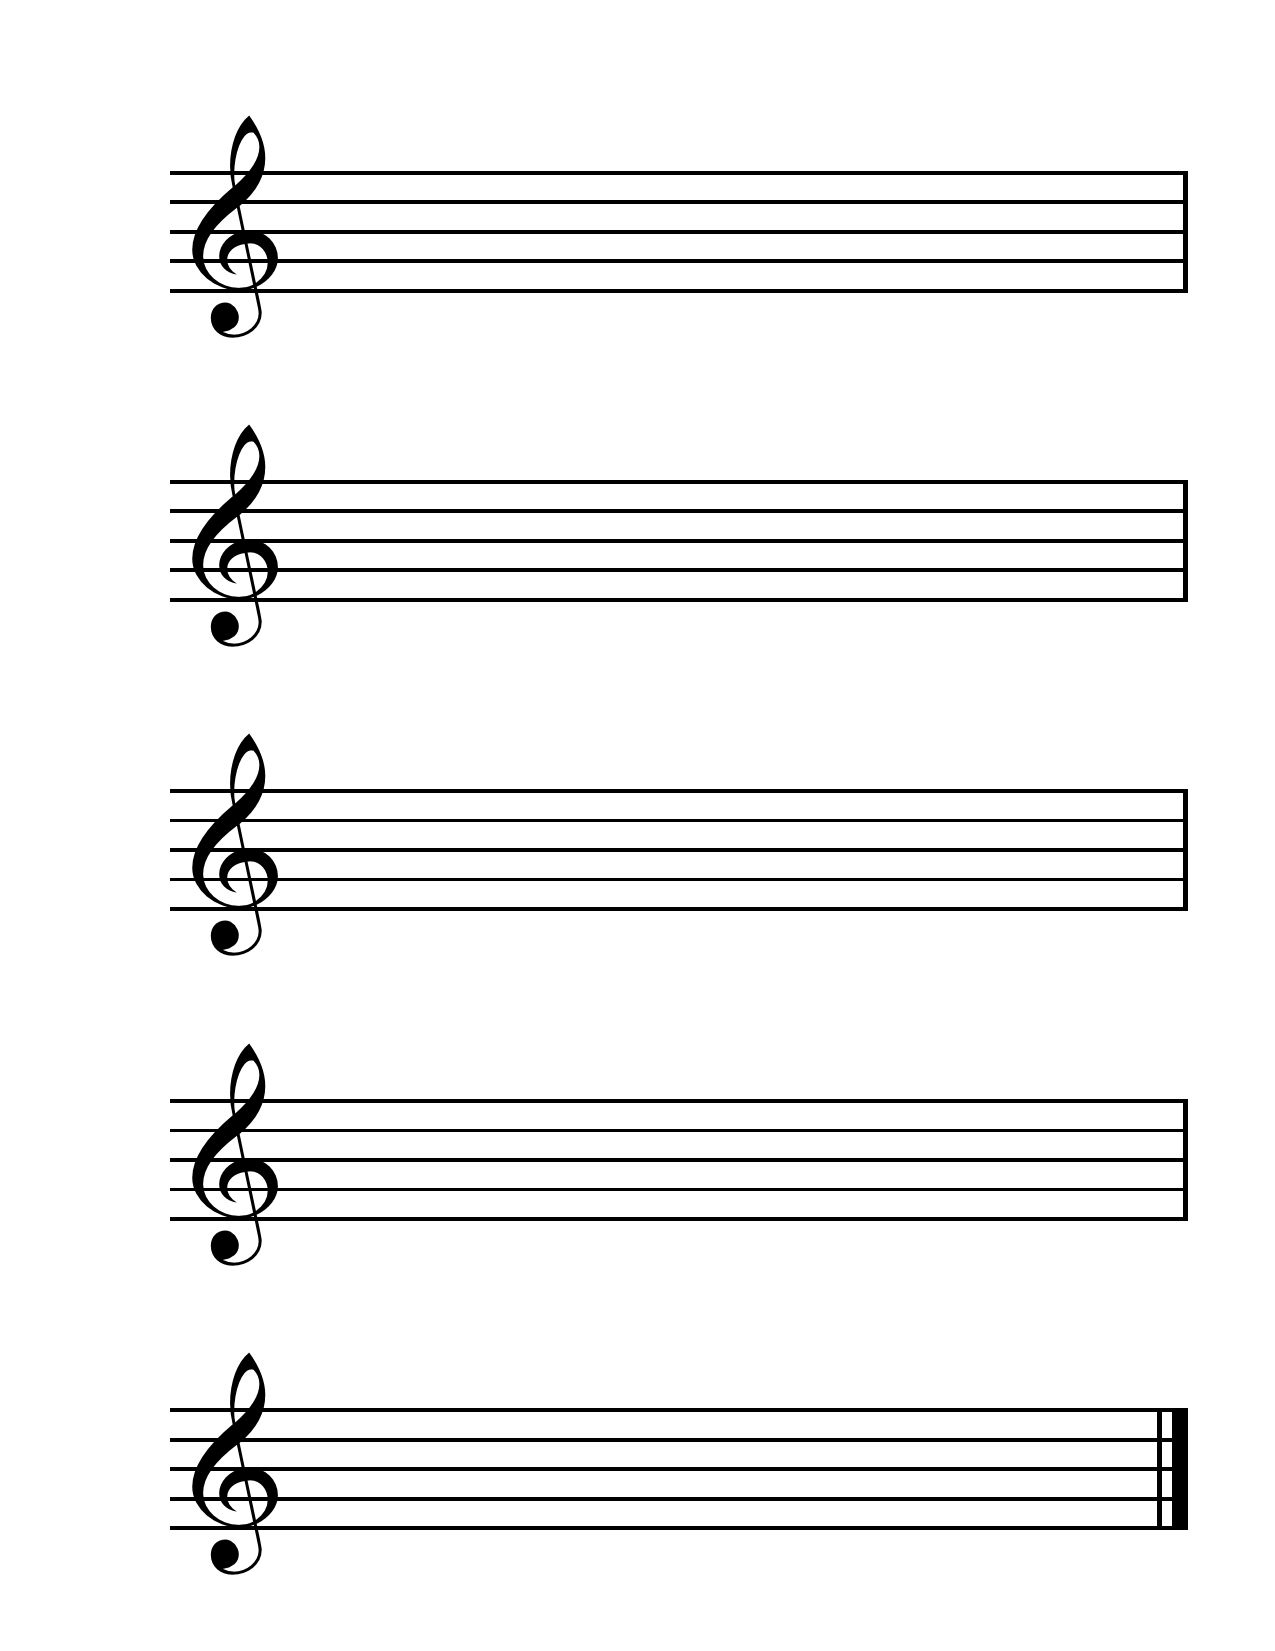 Blank Staff Paper To Print And Share With Your Students. For More - Free Printable Music Staff